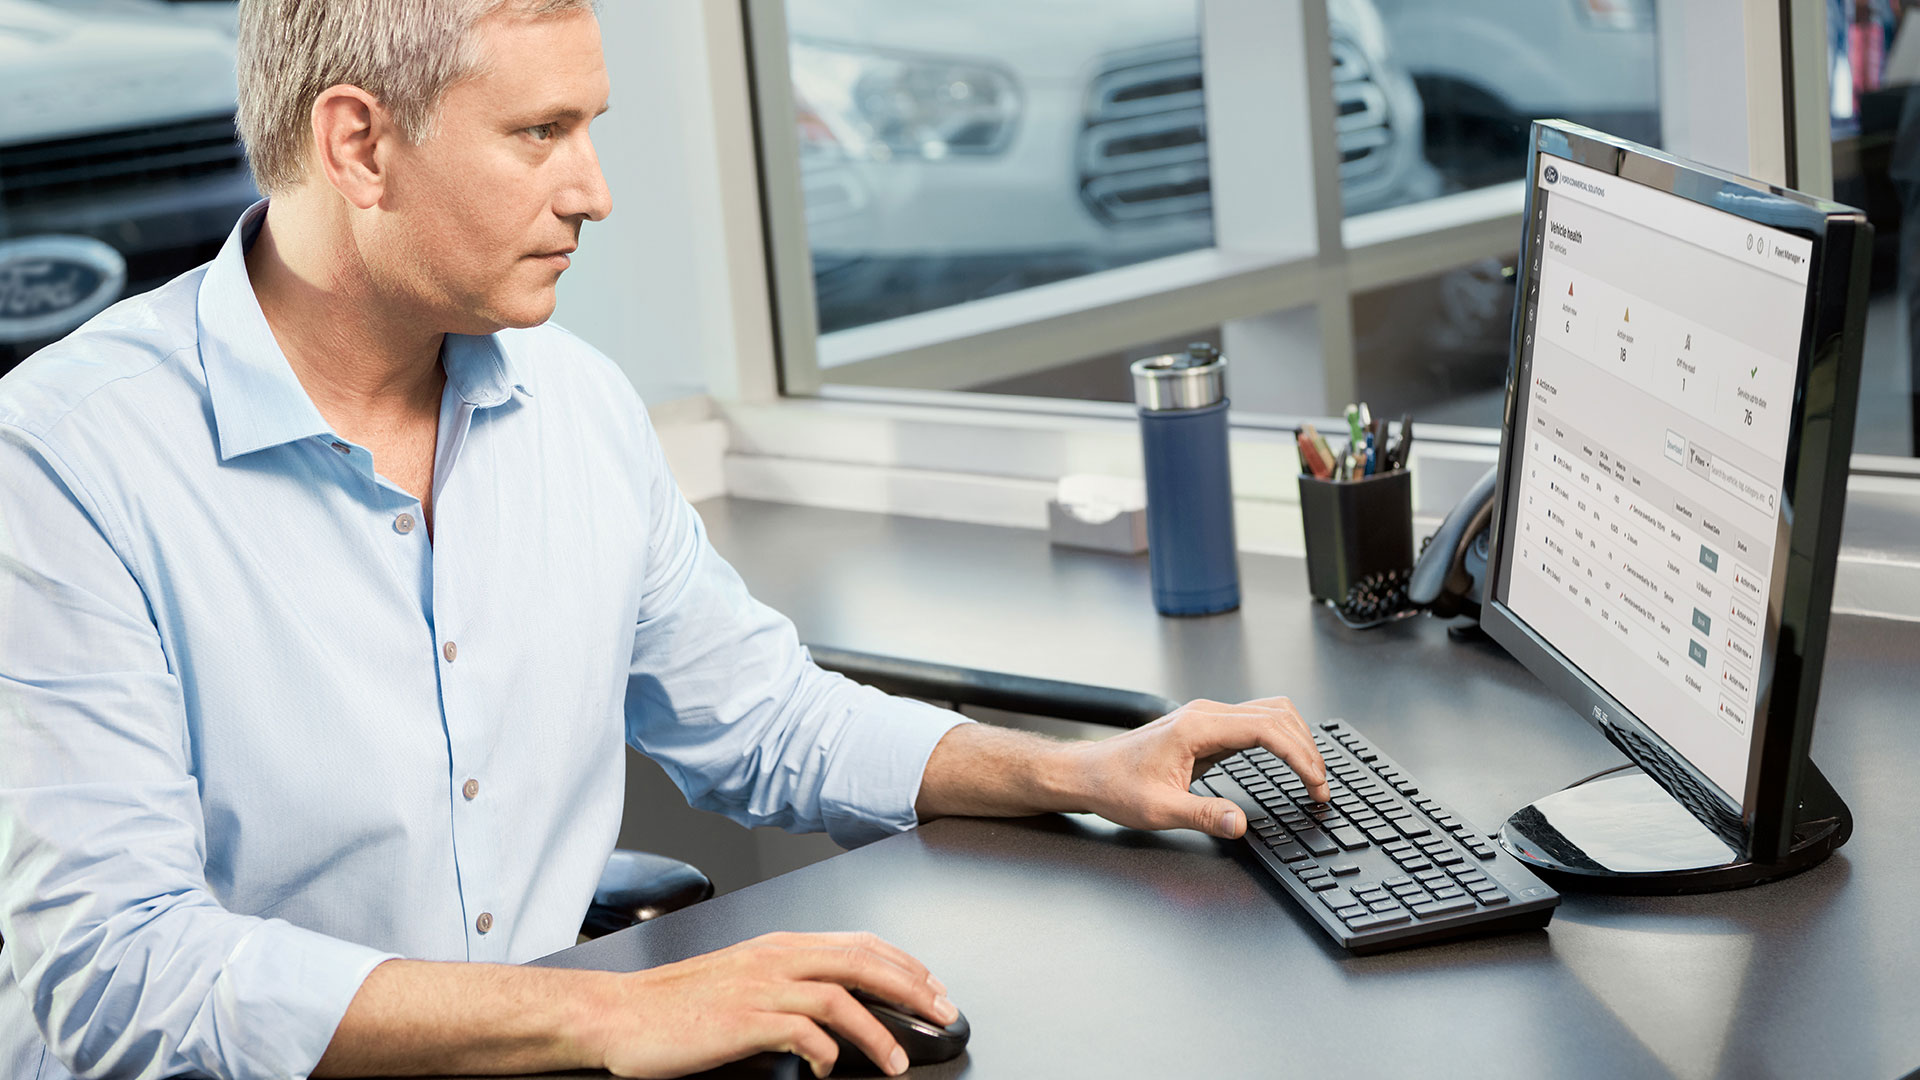 Man sitting at desk with screen